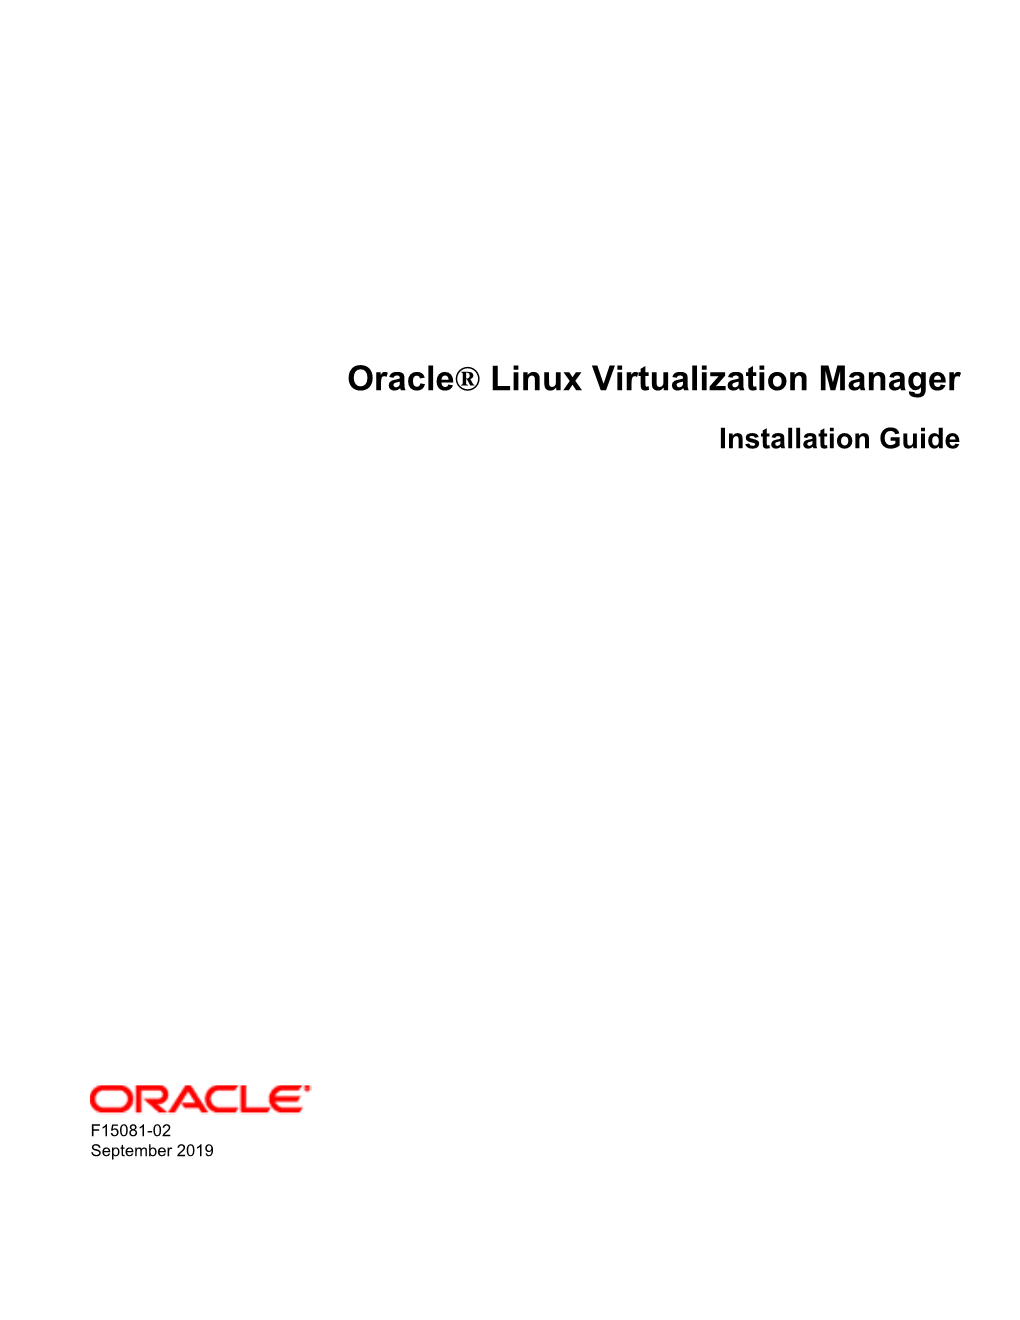 Oracle® Linux Virtualization Manager Installation Guide